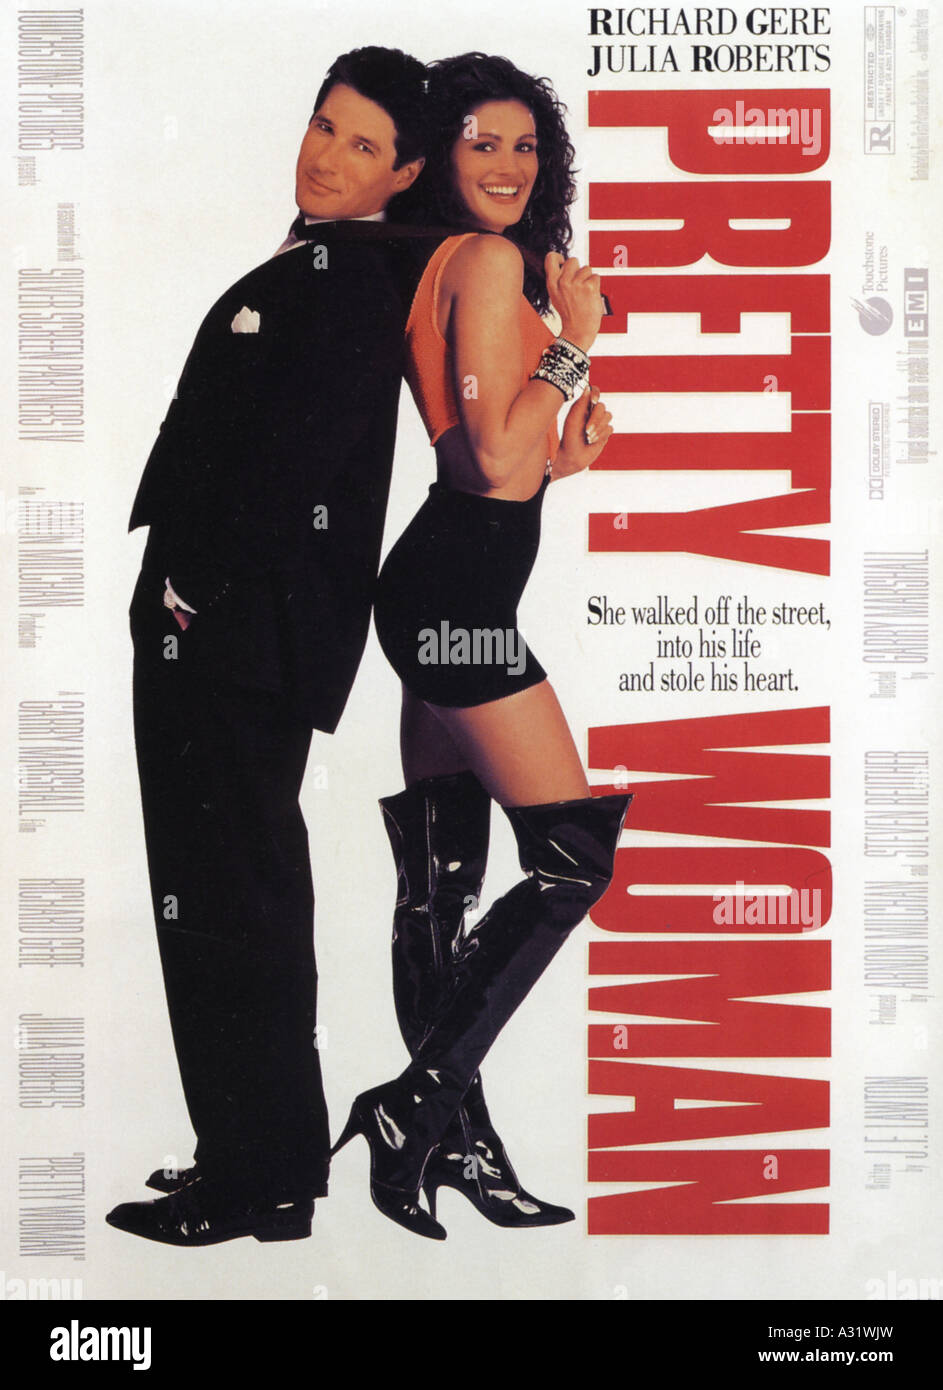 PRETTY WOMAN poster for 1990 Buena Vista/Touchstone film with Richard Gere and Julie Roberts Stock Photo